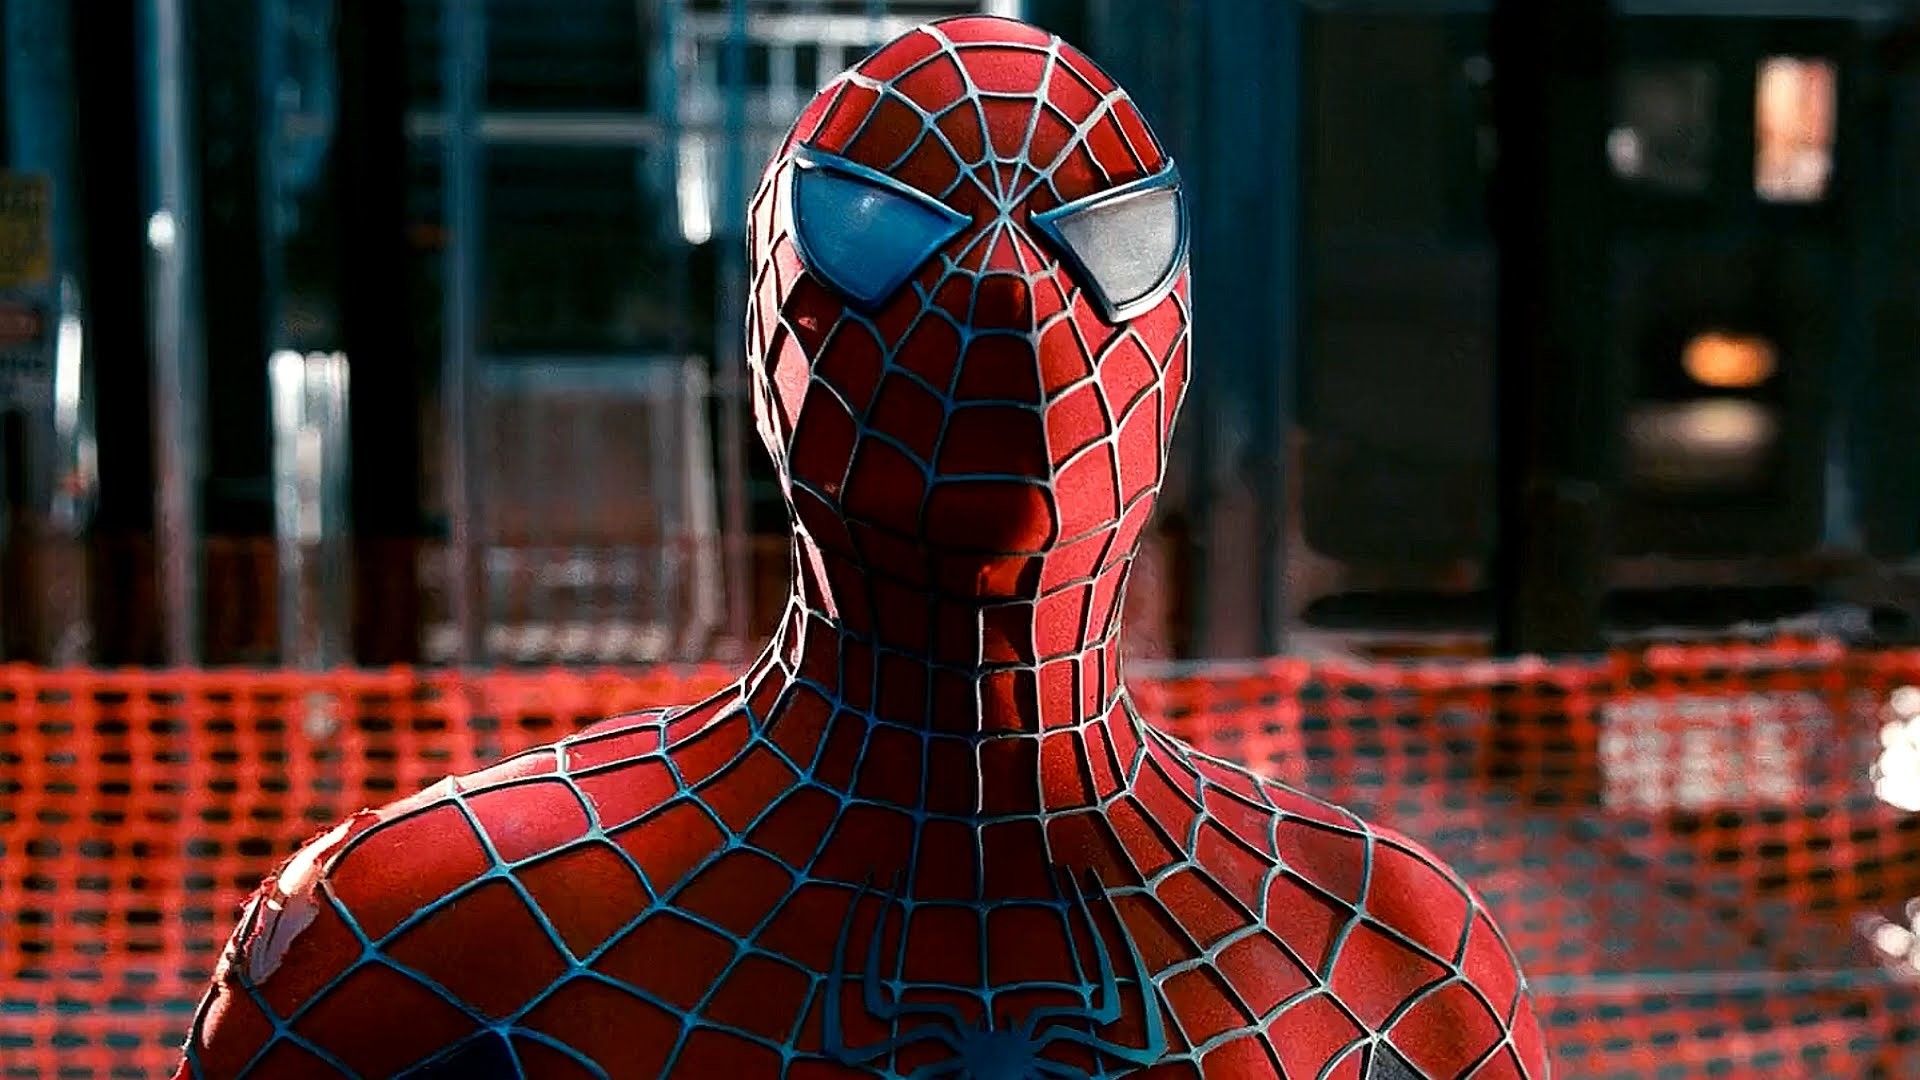 Kers Van Tanzania How to Watch Every Spider-Man Movie In Order, Including No Way Home